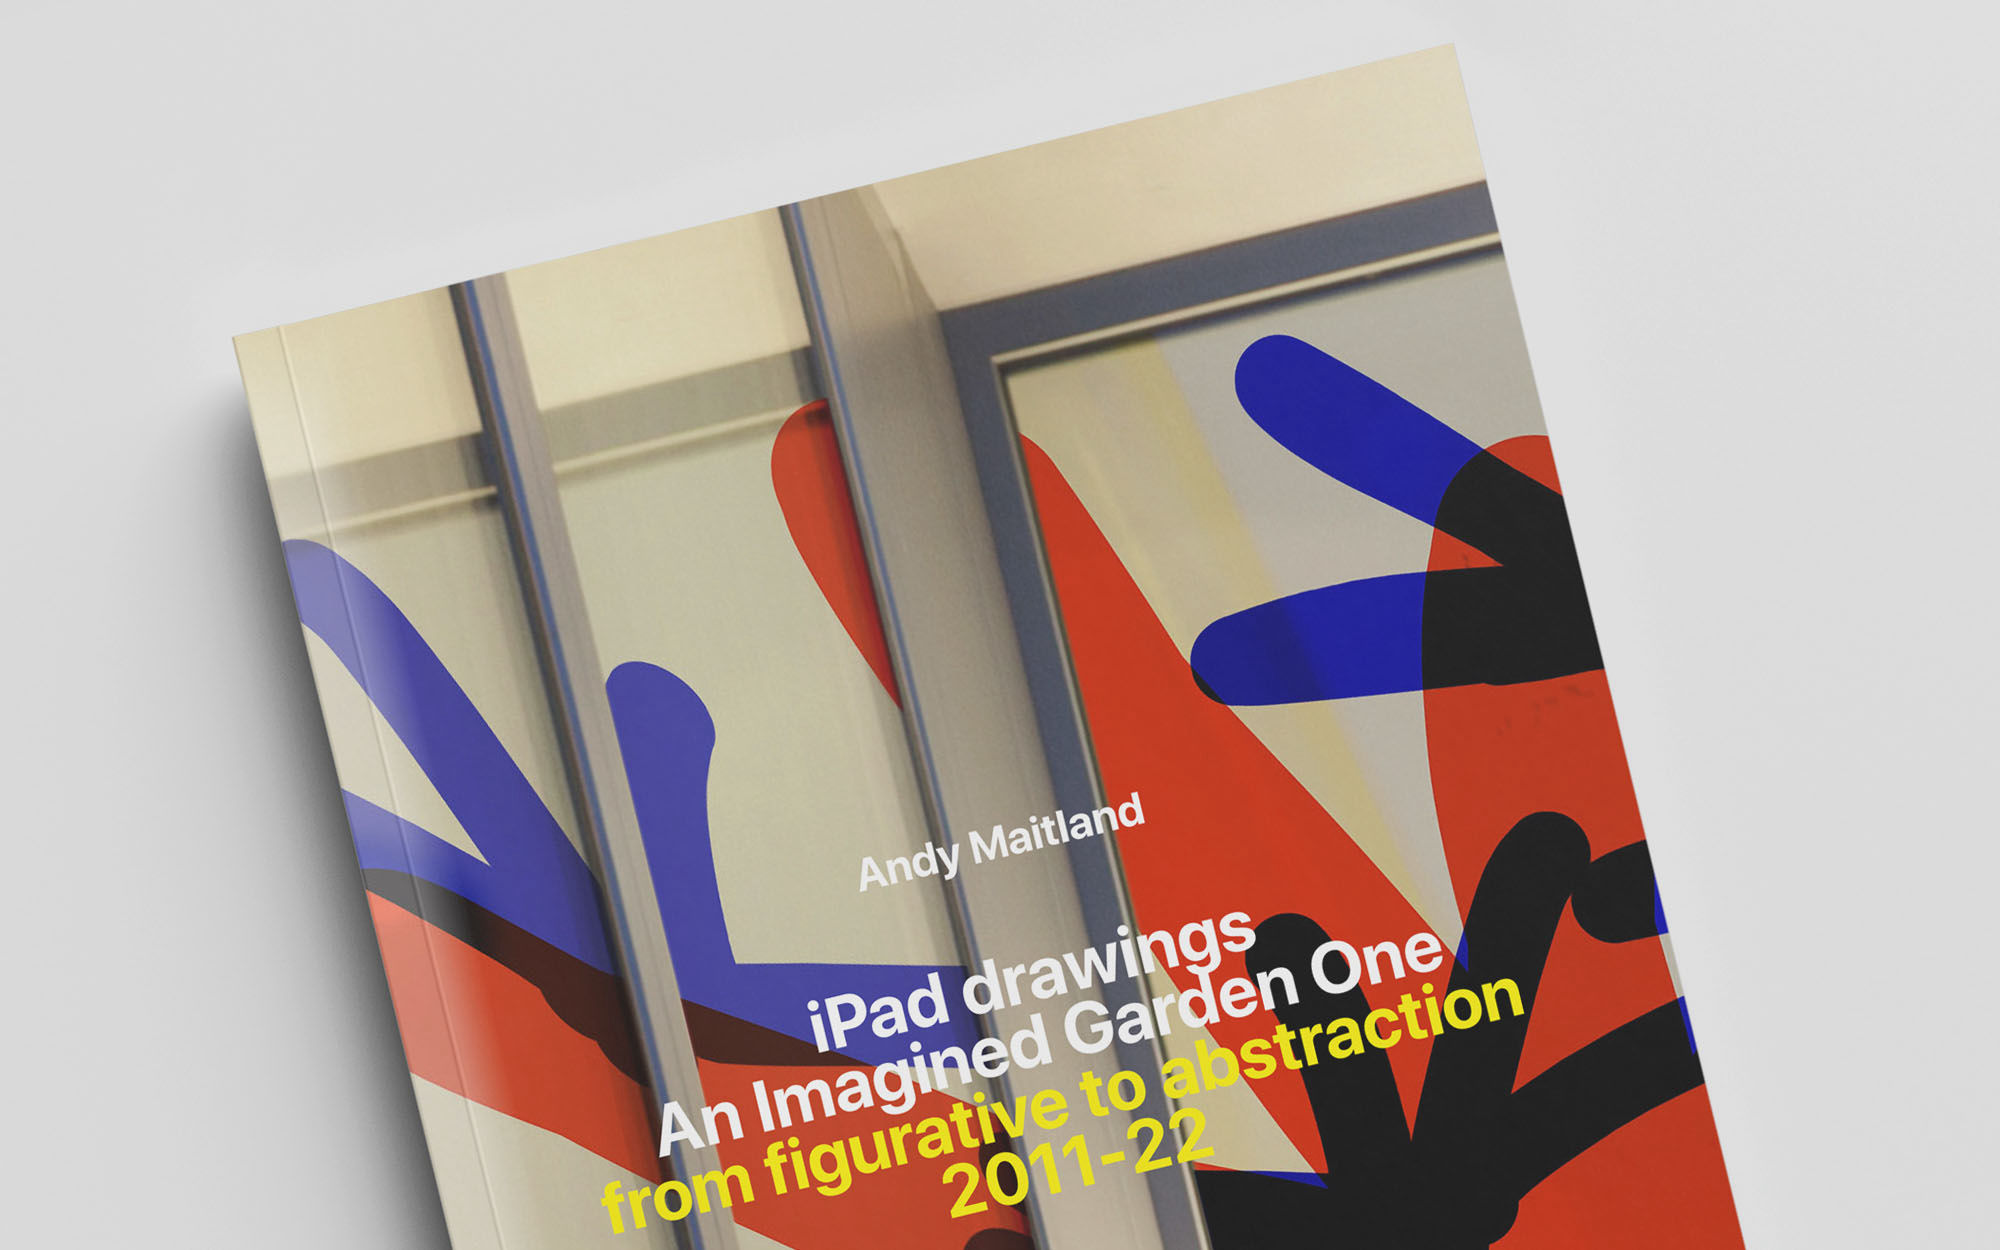 Press Release - Andy Maitland, iPad drawings, An Imagined Garden One, from figurative to abstraction 2011-22.